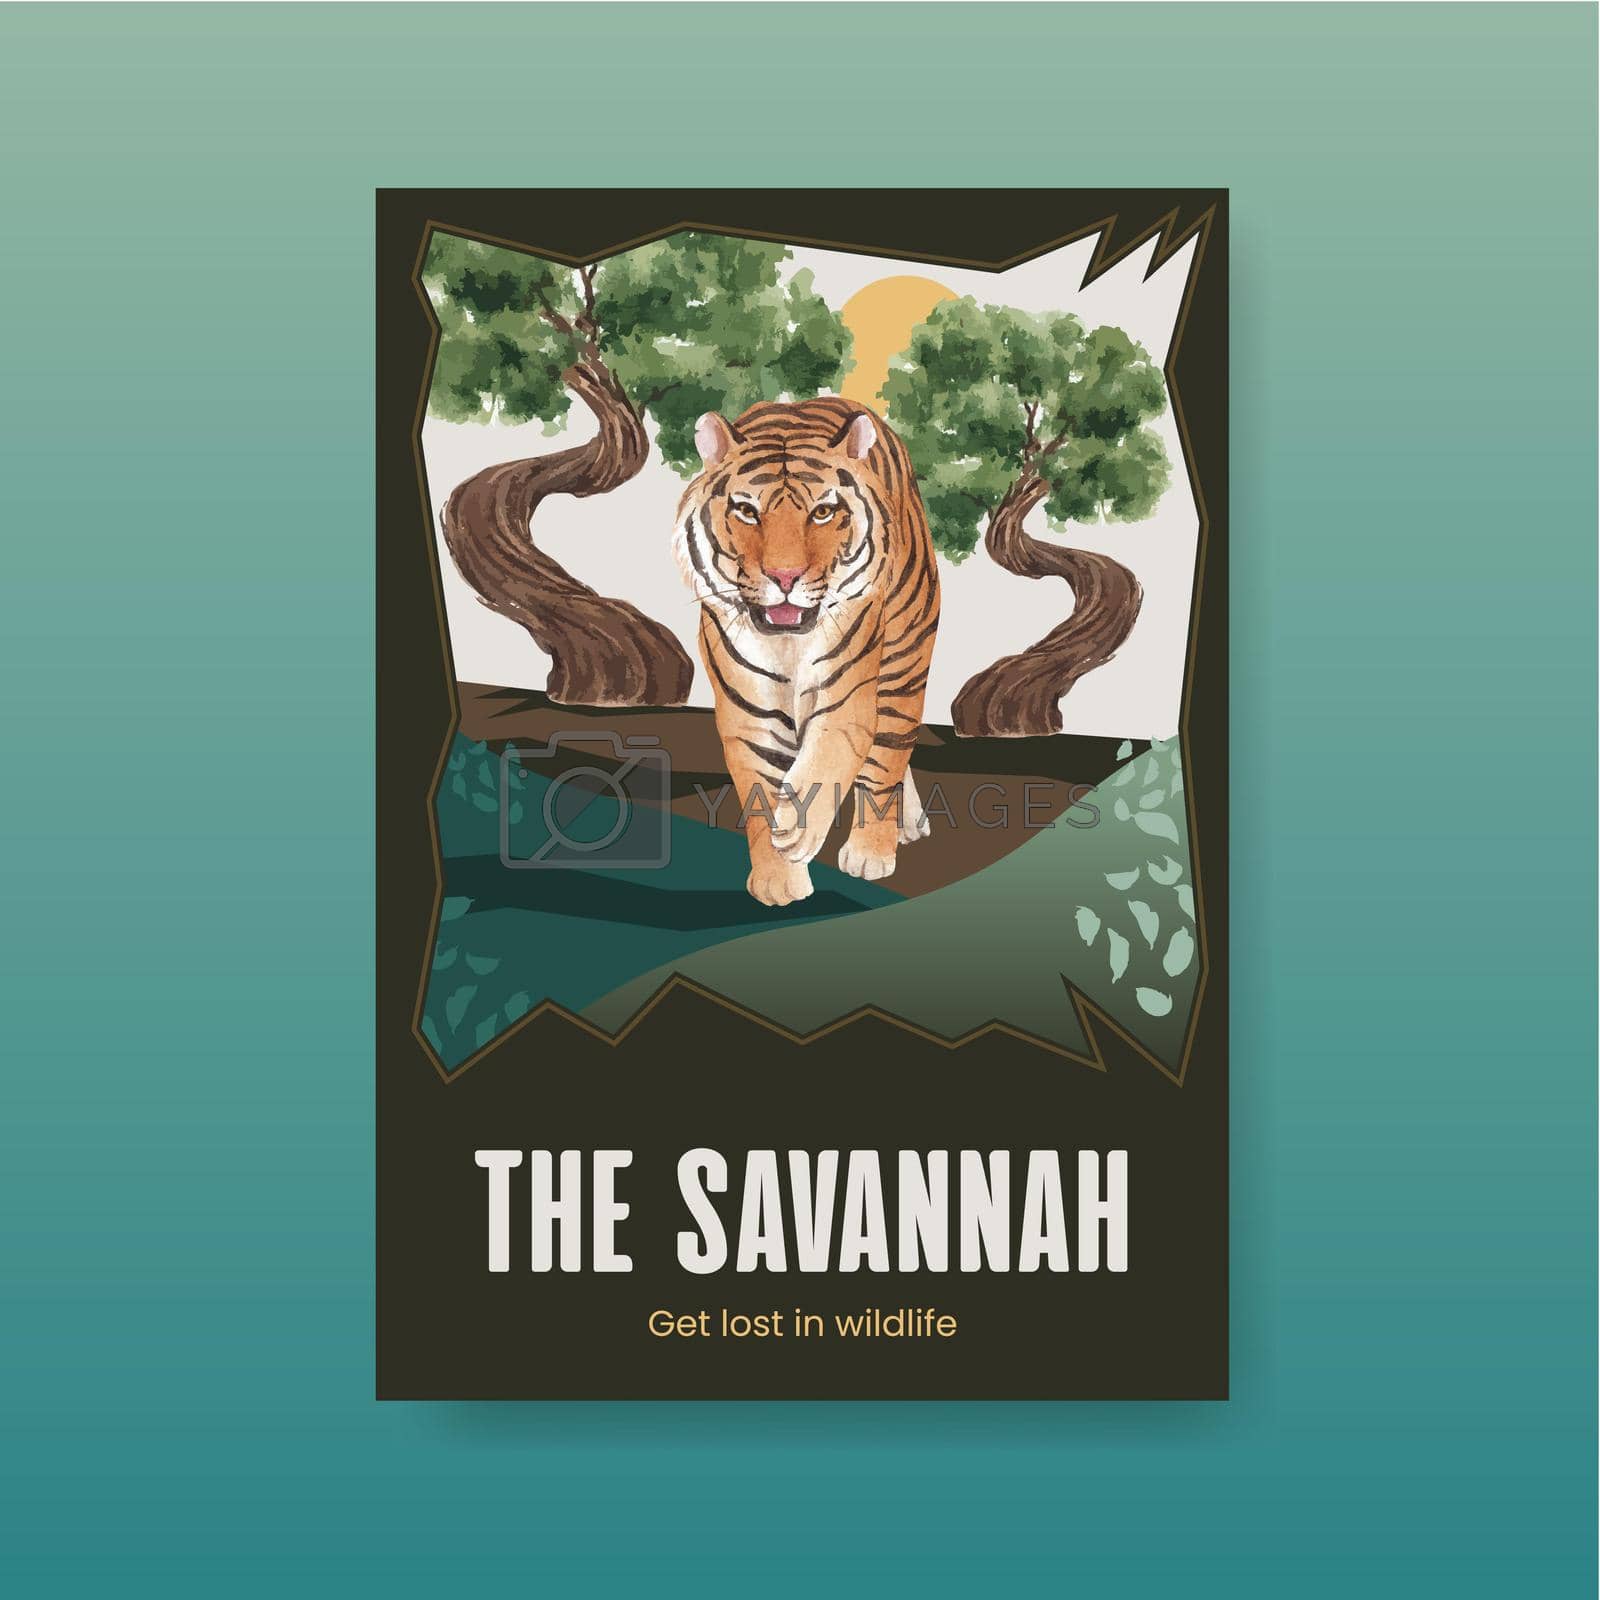 Royalty free image of Poster template with savannah wildlife concept design watercolor illustration by Photographeeasia